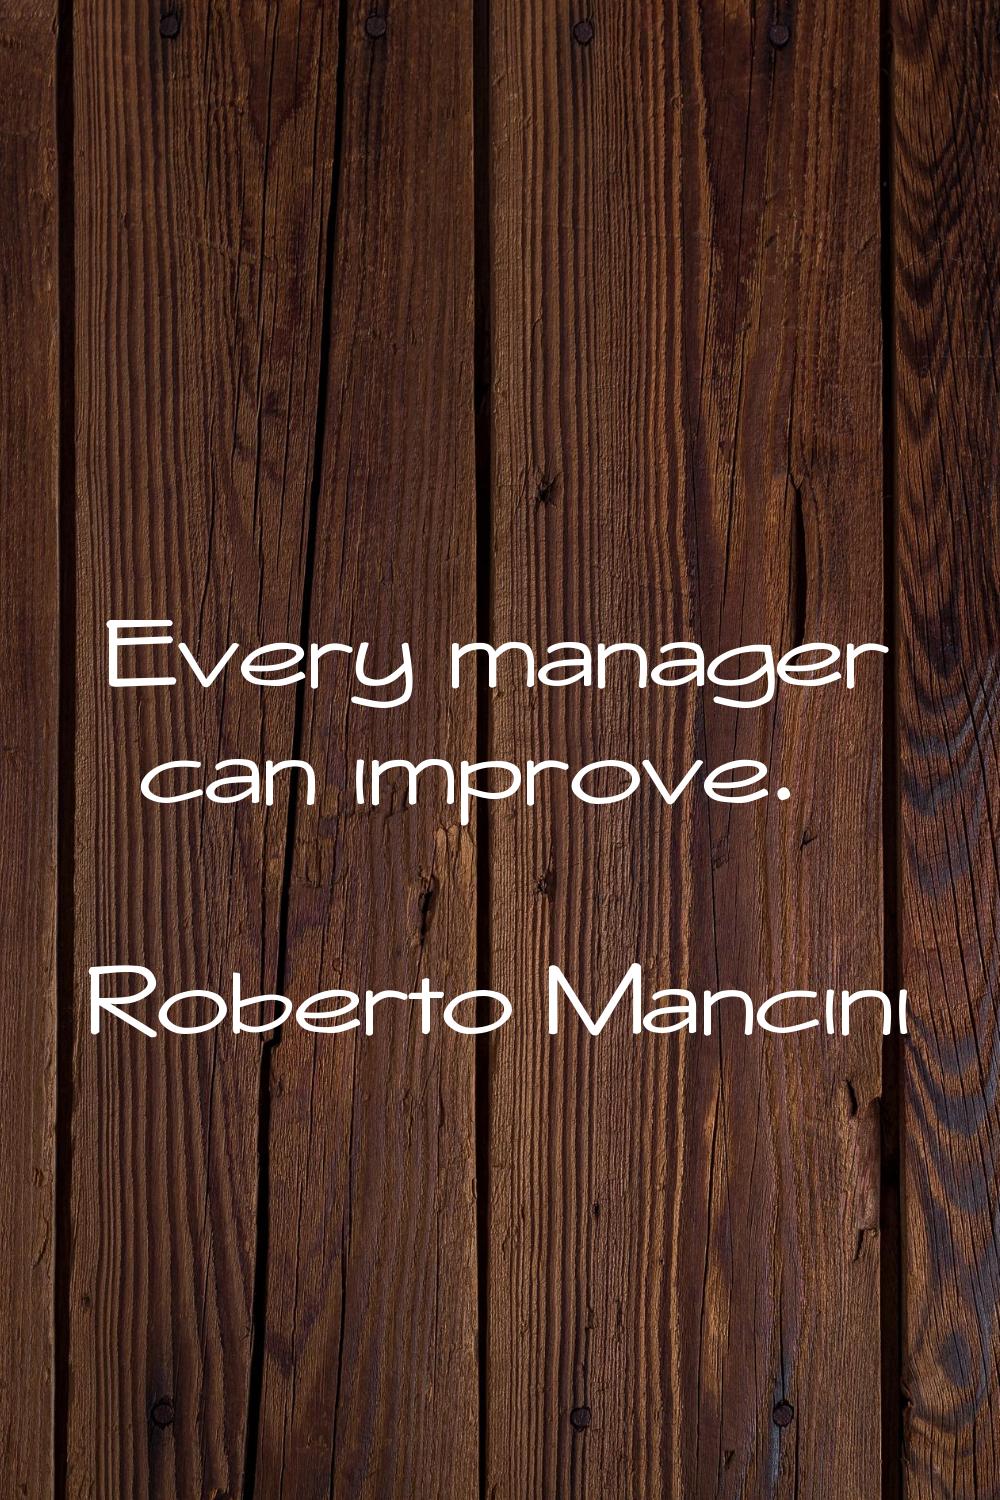 Every manager can improve.